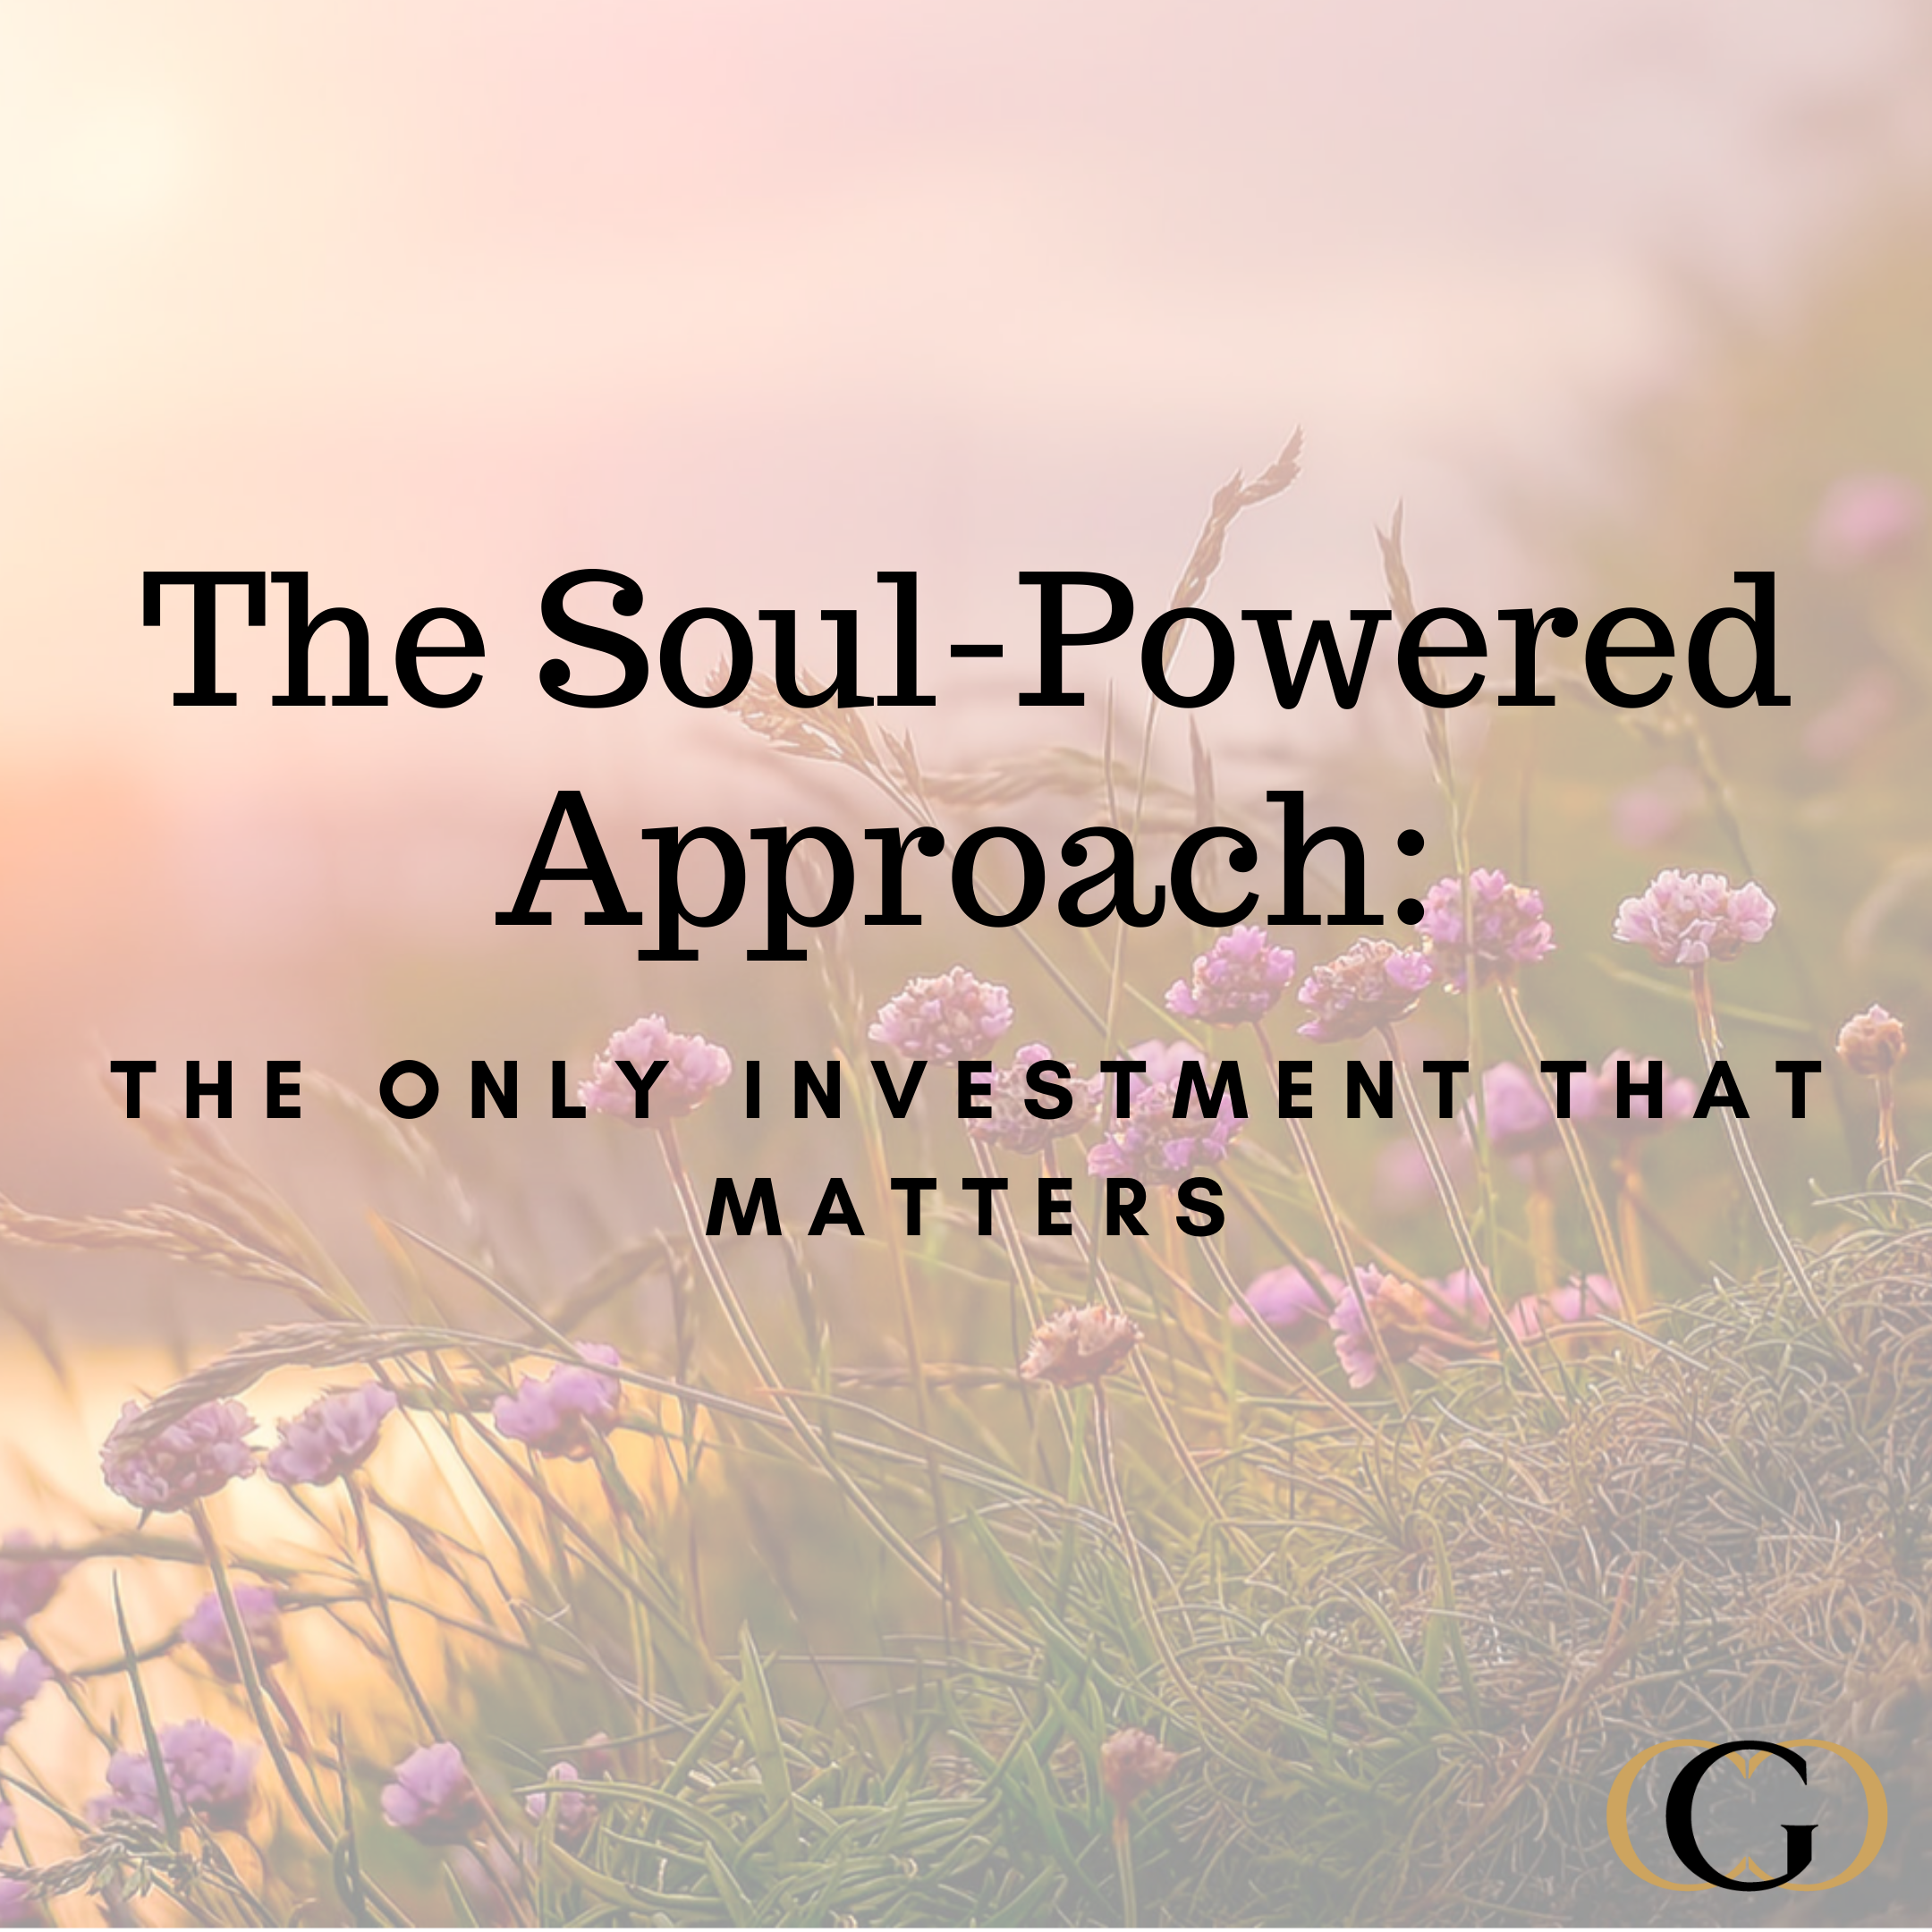 The Soul-Powered Approach: The Only Investment that Matters